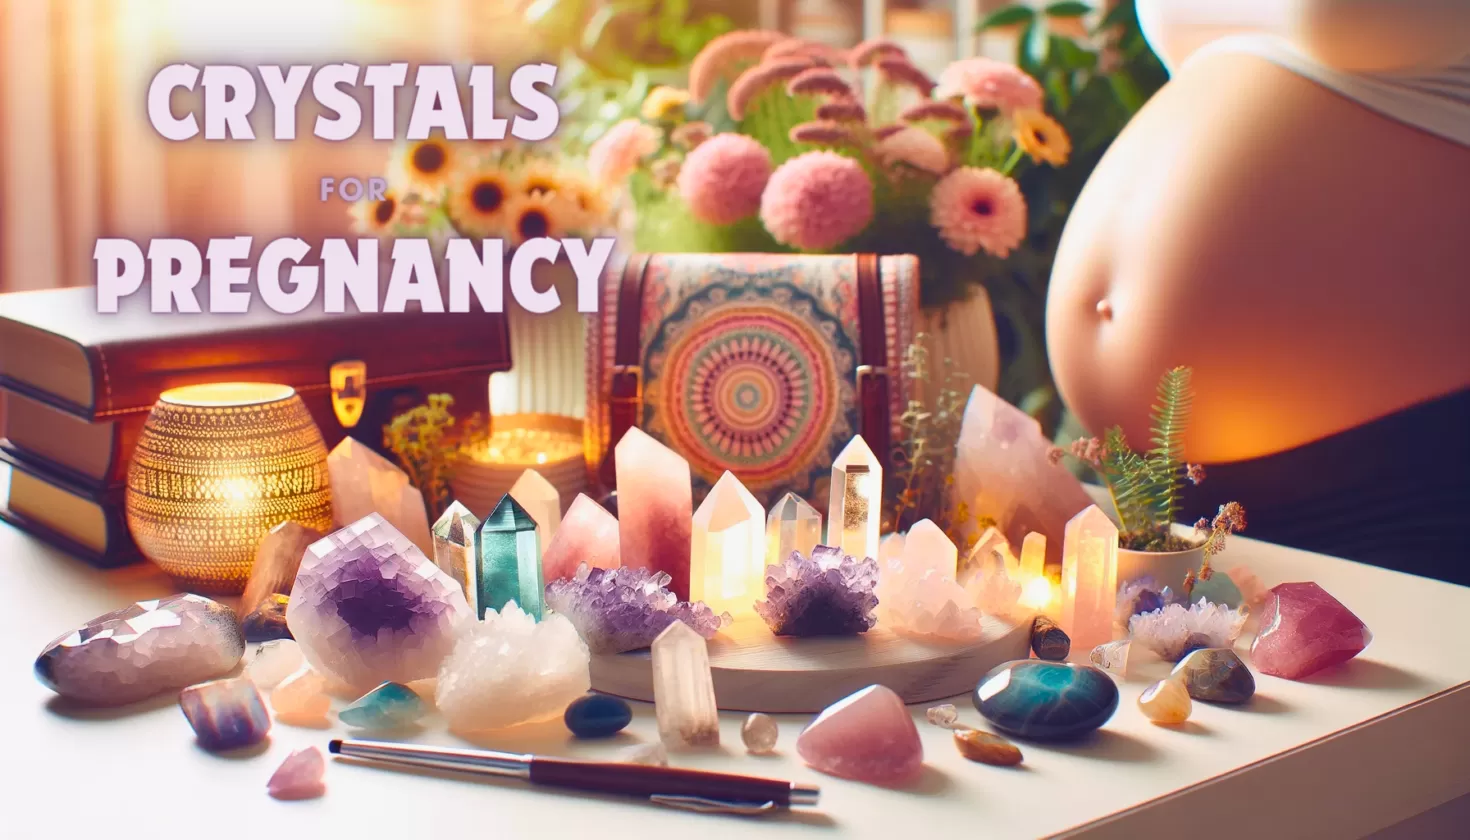 Vibrant and colorful array of healing crystals for pregnancy, artfully arranged with pregnancy-related items, emitting a sense of joy and well-being, featured image